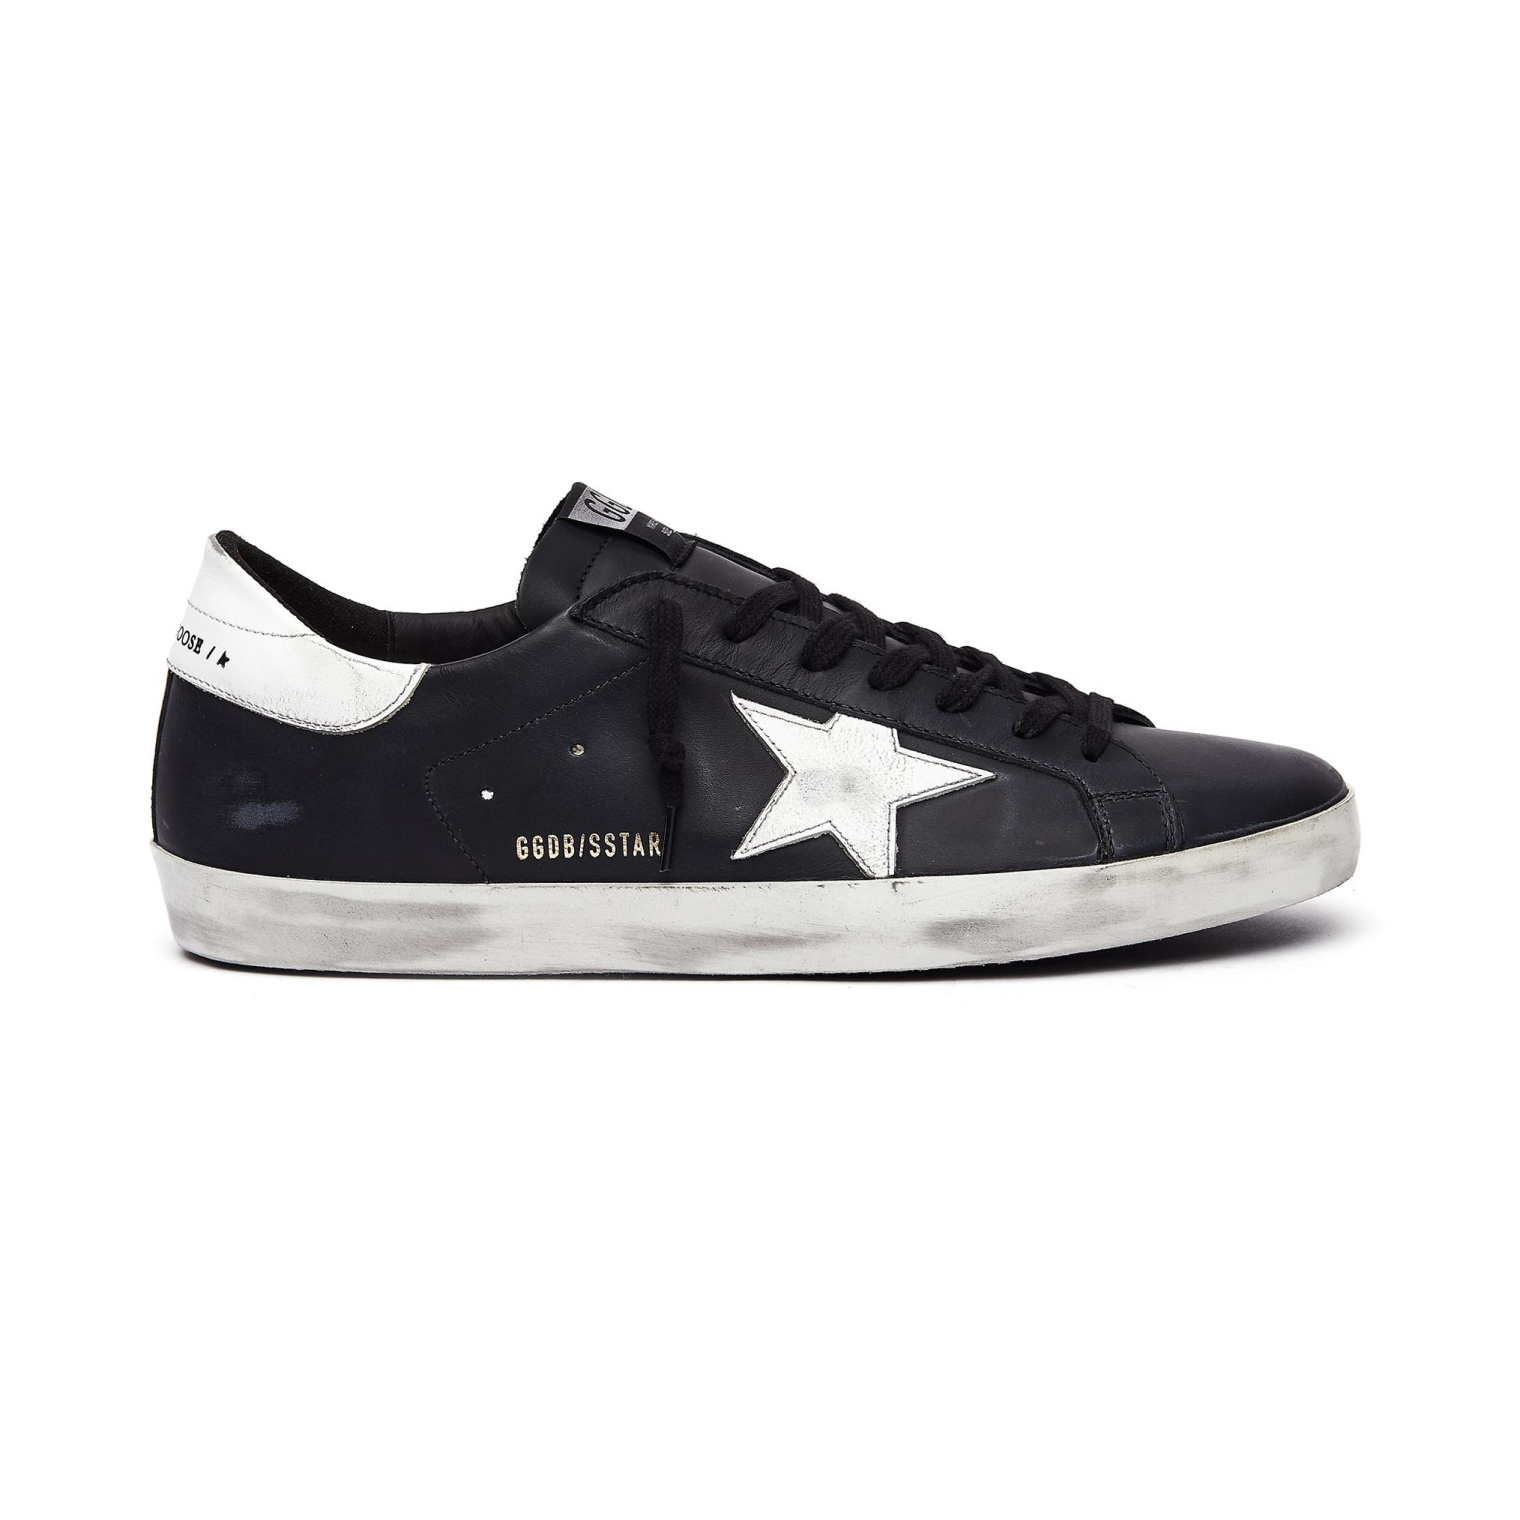 Golden Goose Black & White Leather Superstar Sneakers